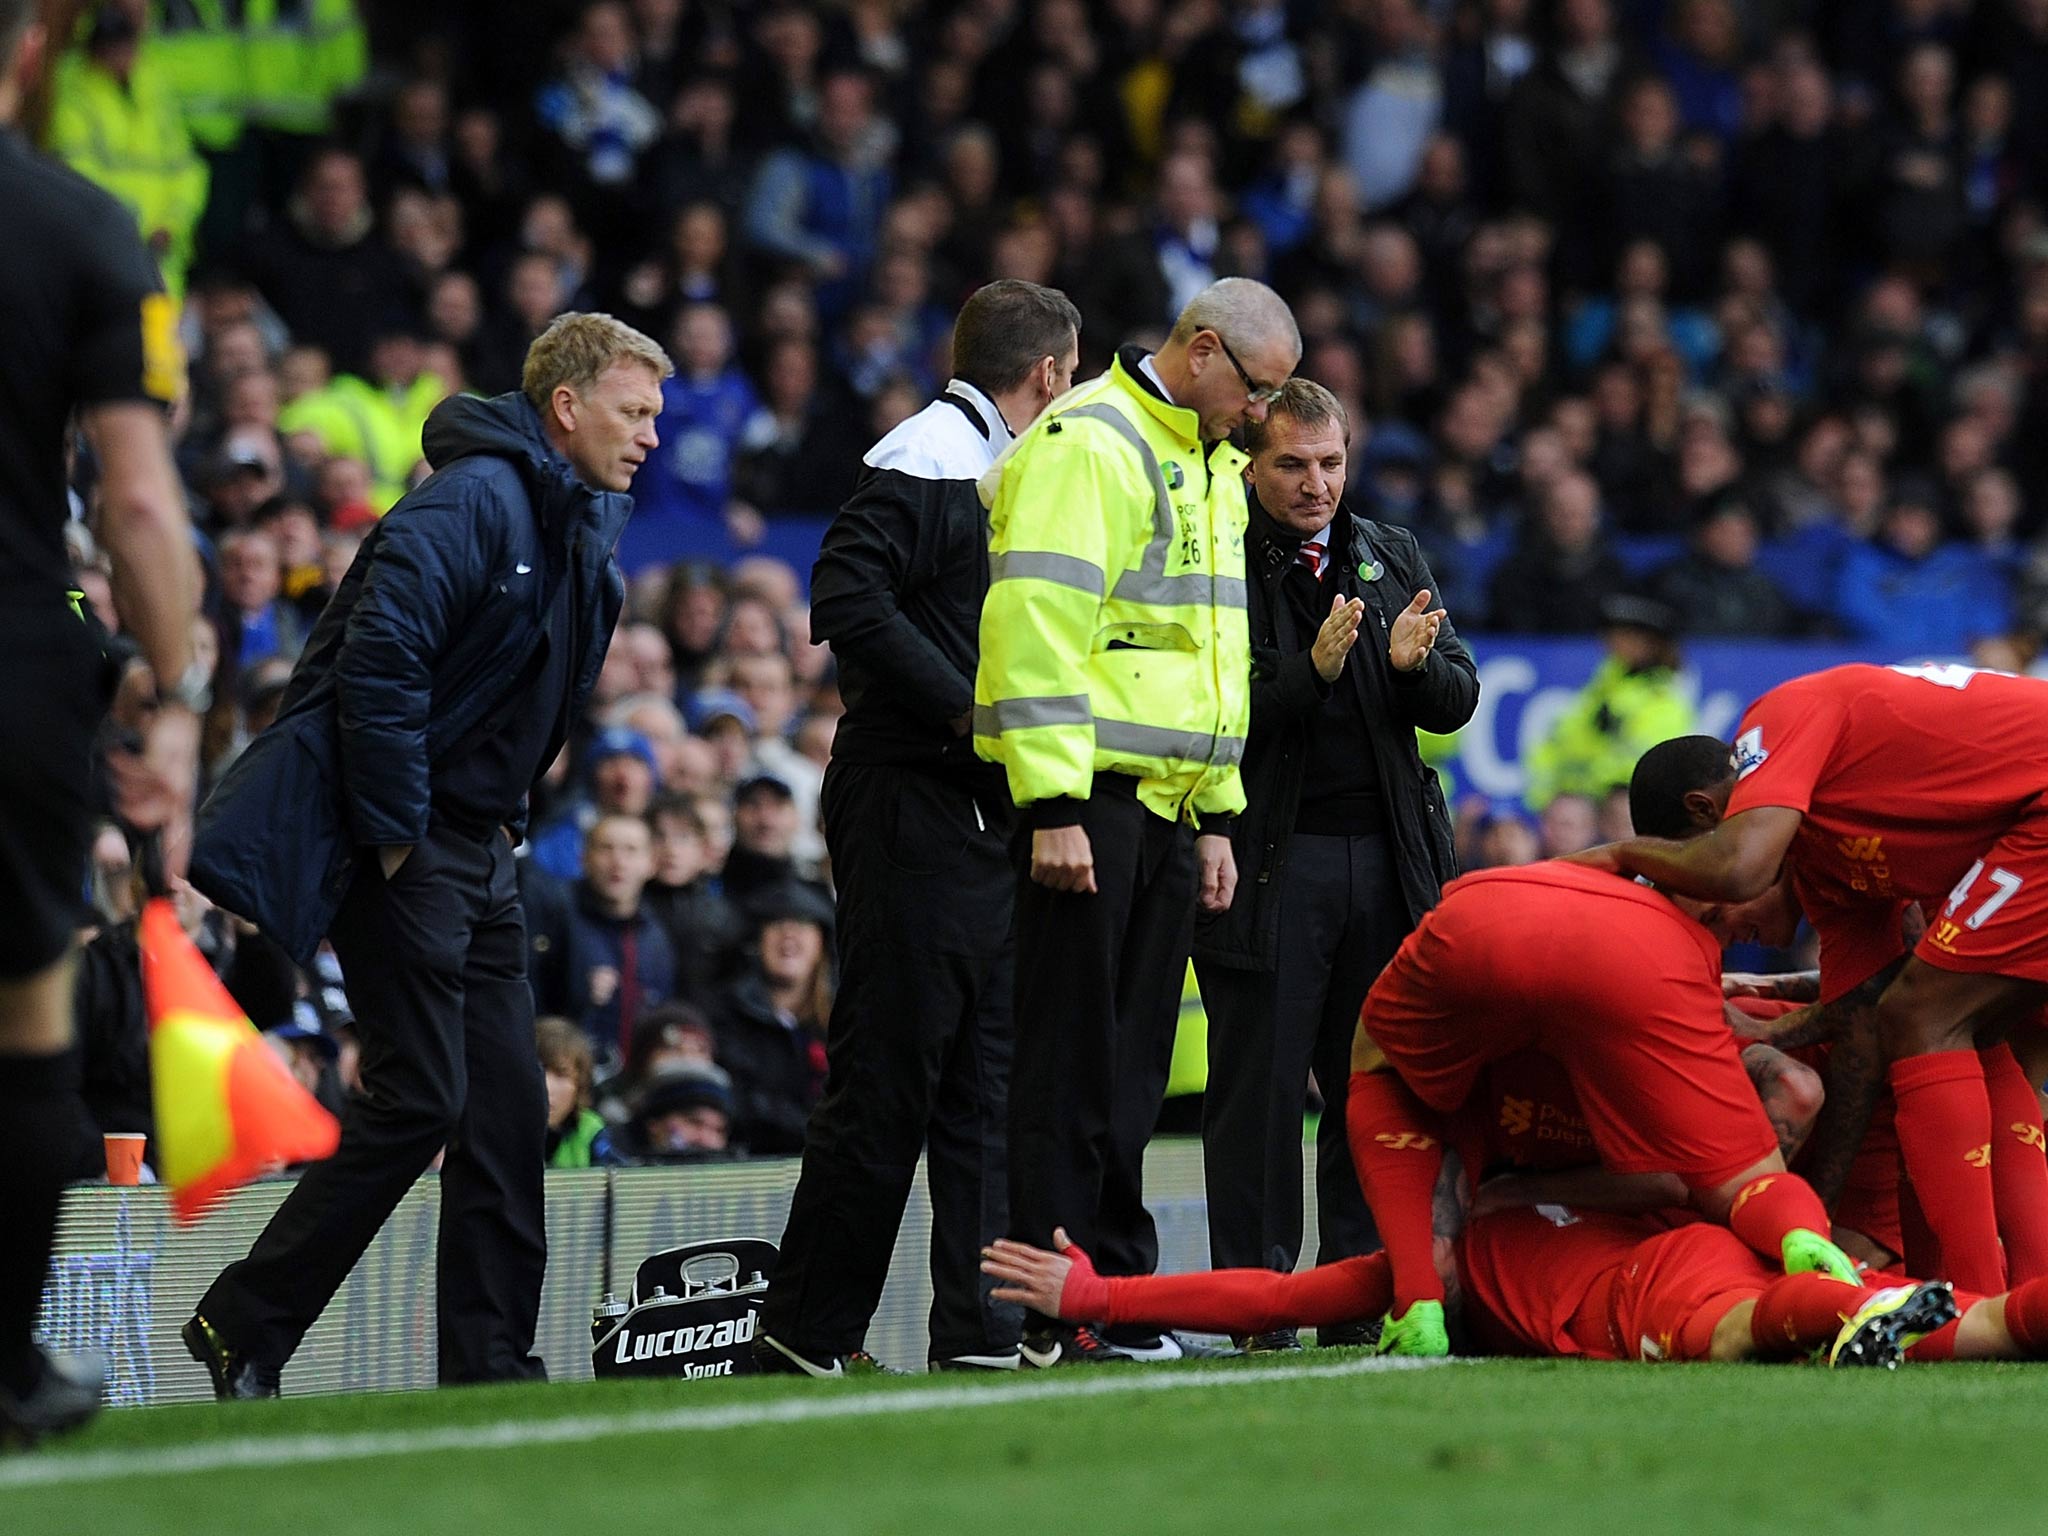 October 2012: Celebrated a goal against Everton by diving in front of Toffees boss David Moyes who had earlier claimed that "divers" such as Suarez were putting fans off the English game.